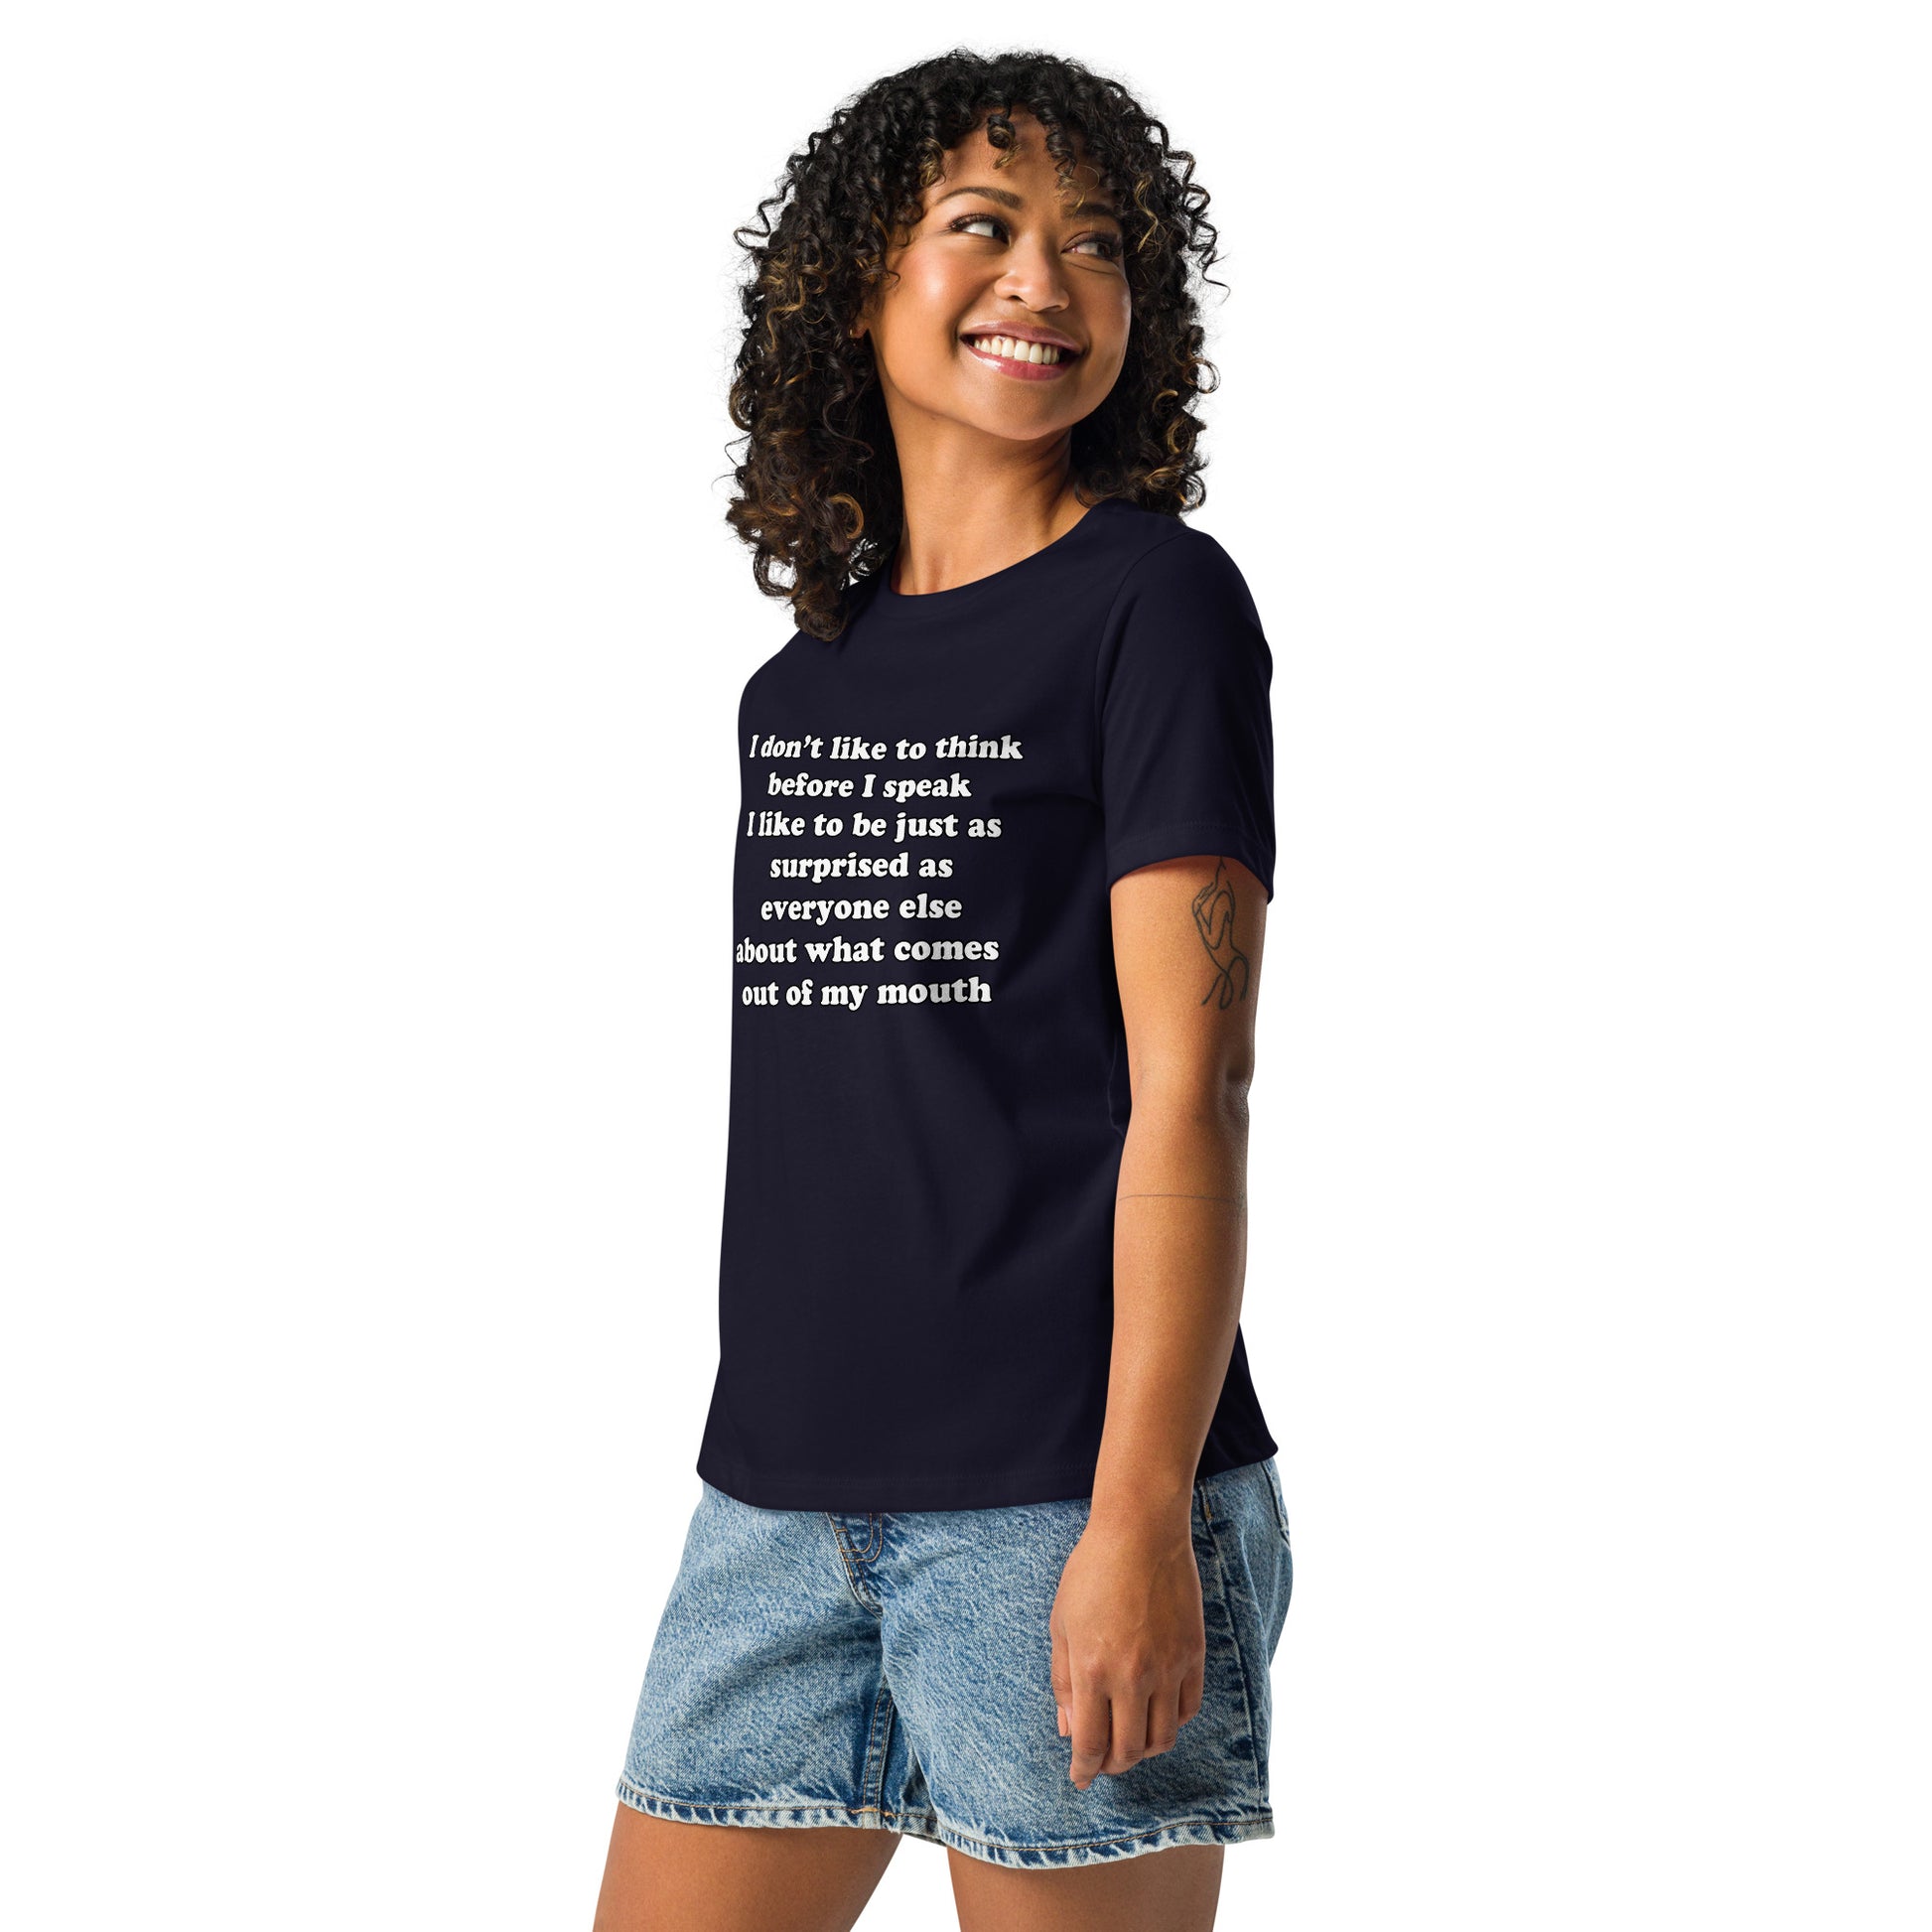 Woman with navy blue t-shirt with text “I don't think before I speak Just as serprised as everyone about what comes out of my mouth"